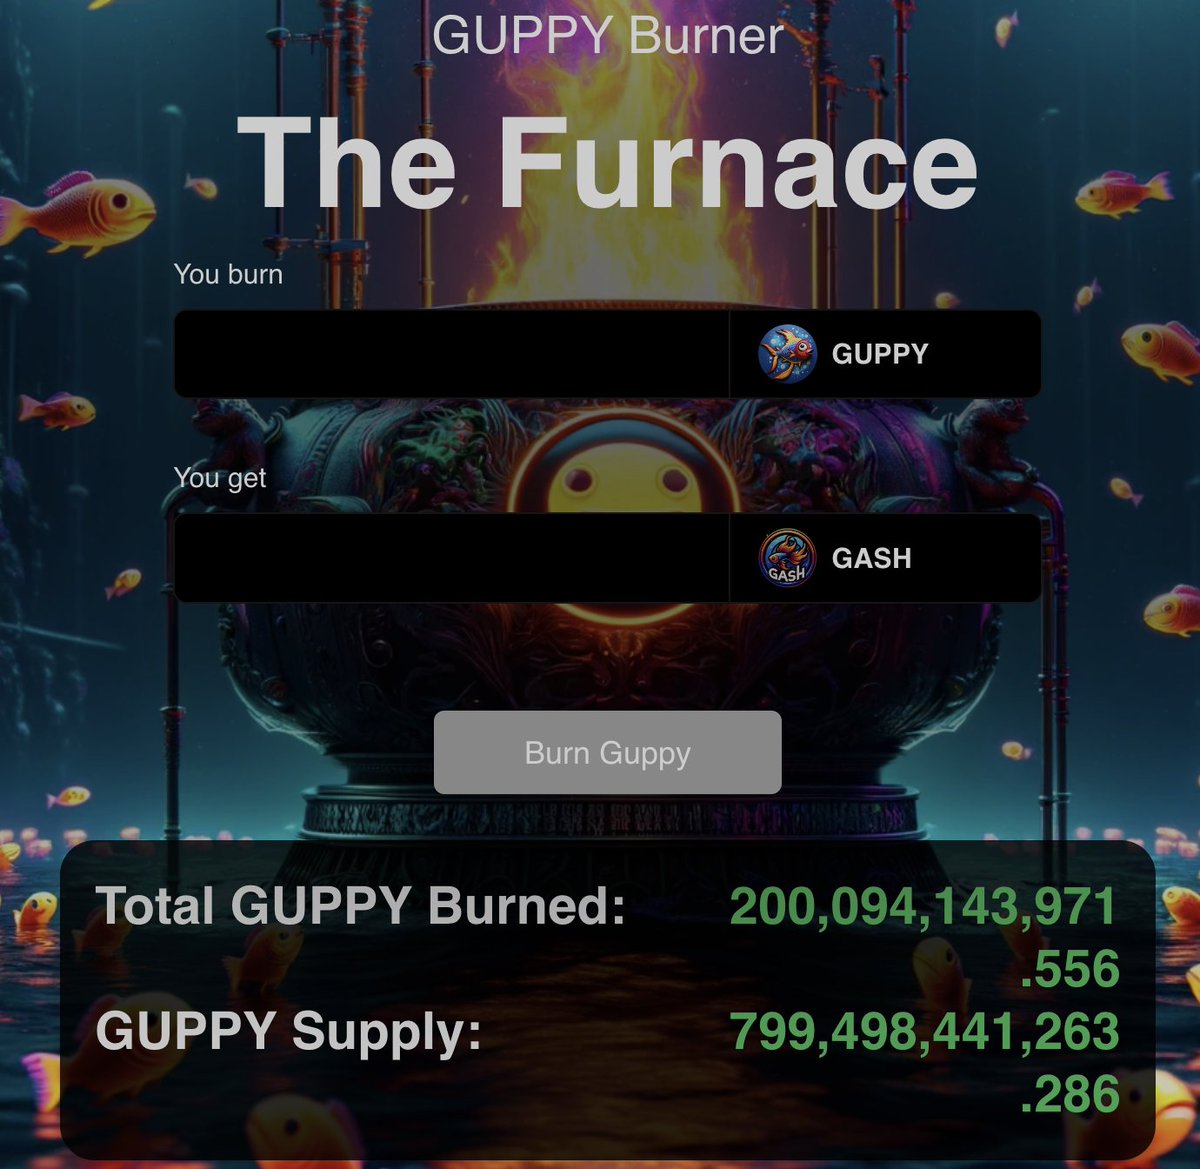 Can you smell what The Furnace is cooking? 🐠 20% of the $GUPPY supply has now been burnt 🔥 $gASH staking is yielding 100%+ APR 📈 Wait until you see what happens for The Furnace v2